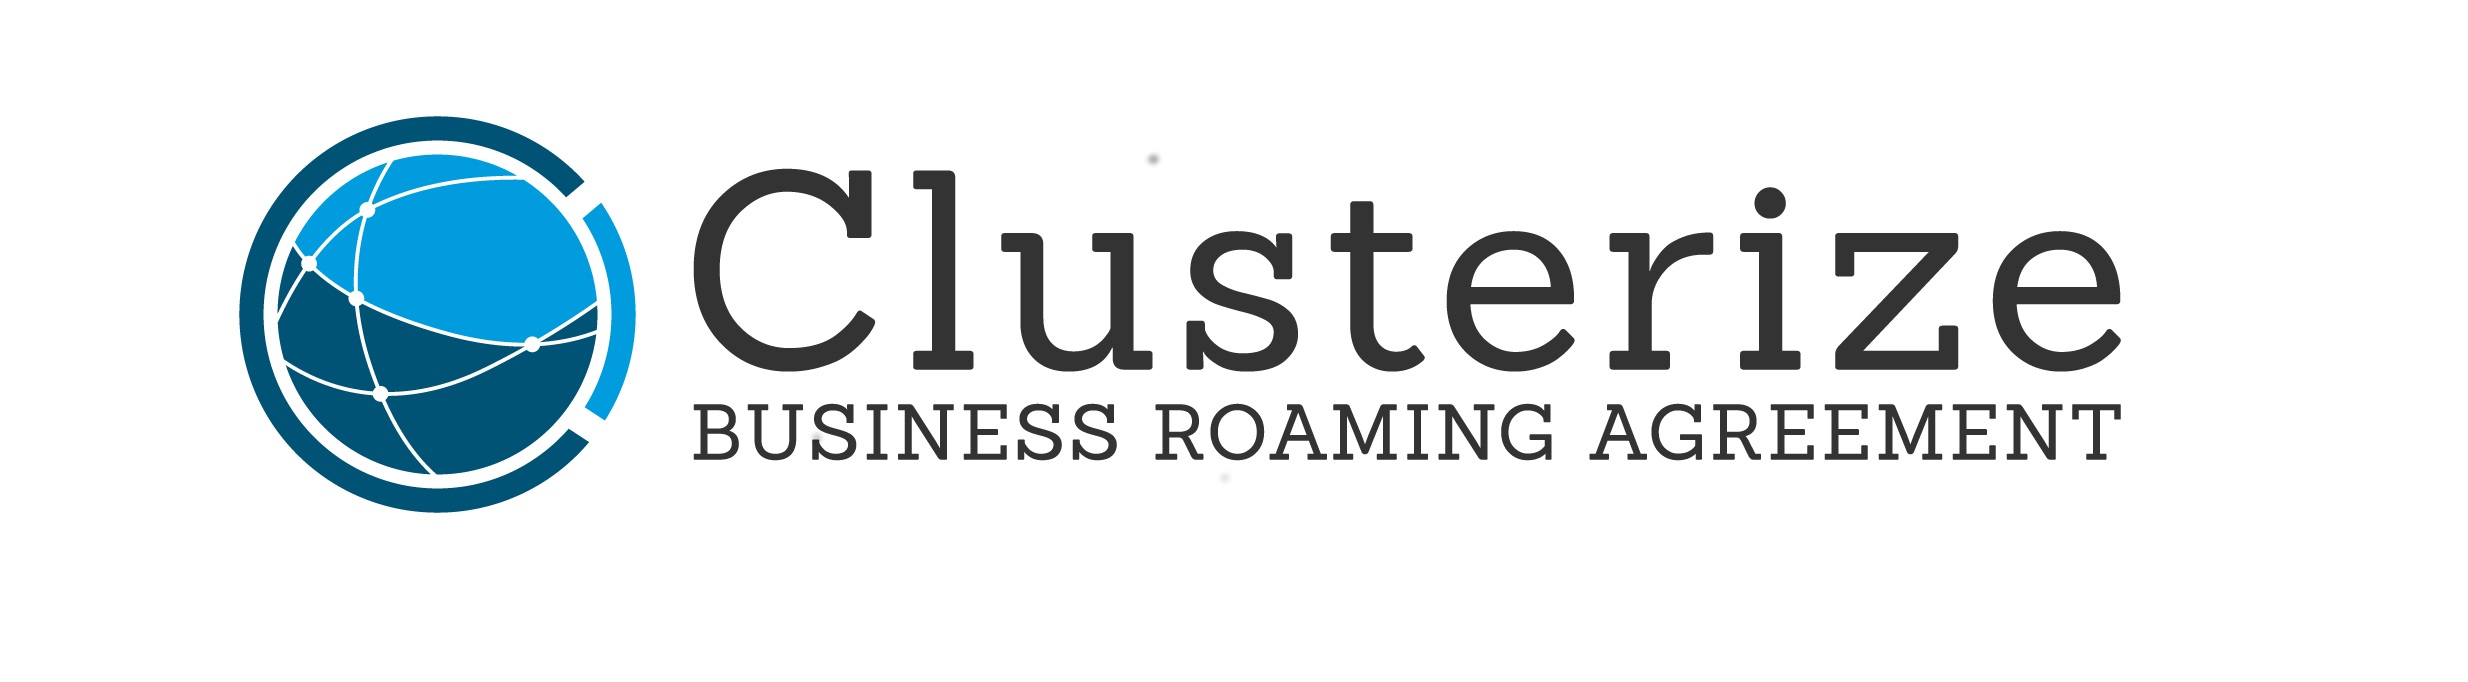 Clusterize: Business Roaming Agreement